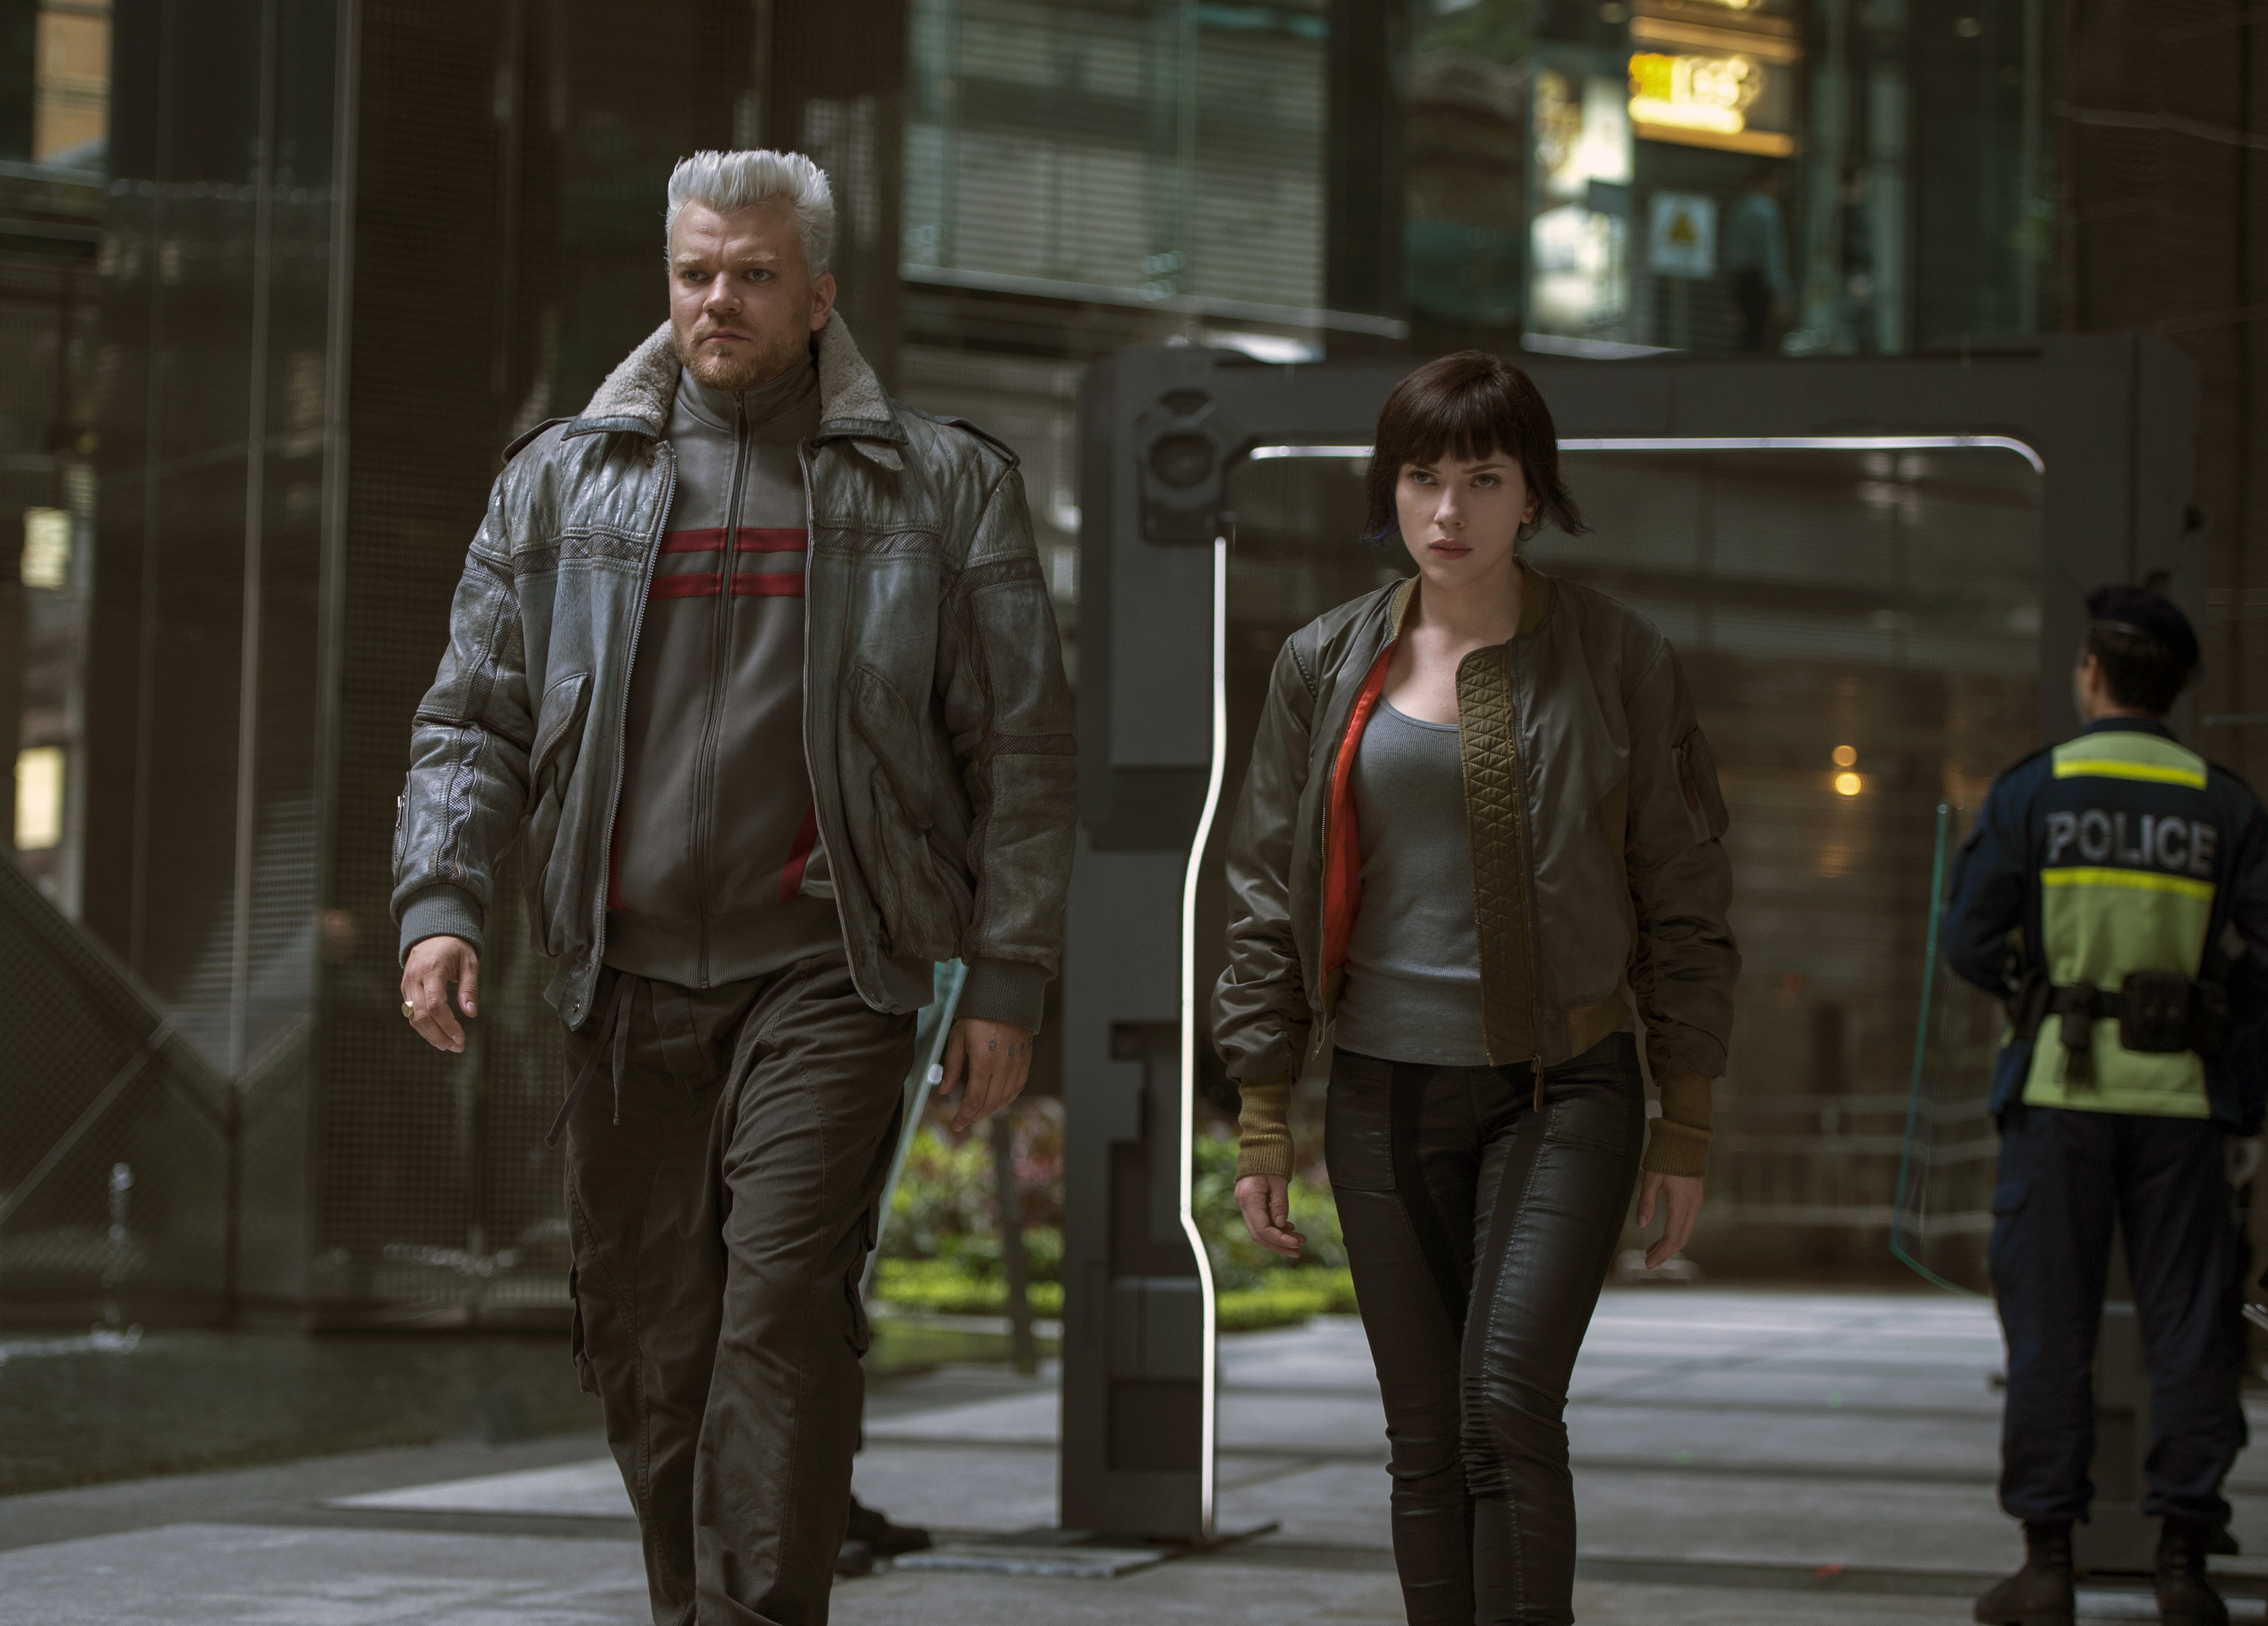 White-washing is a glaring problem with ‘Ghost in the Shell’ - The Blade4369 x 3133